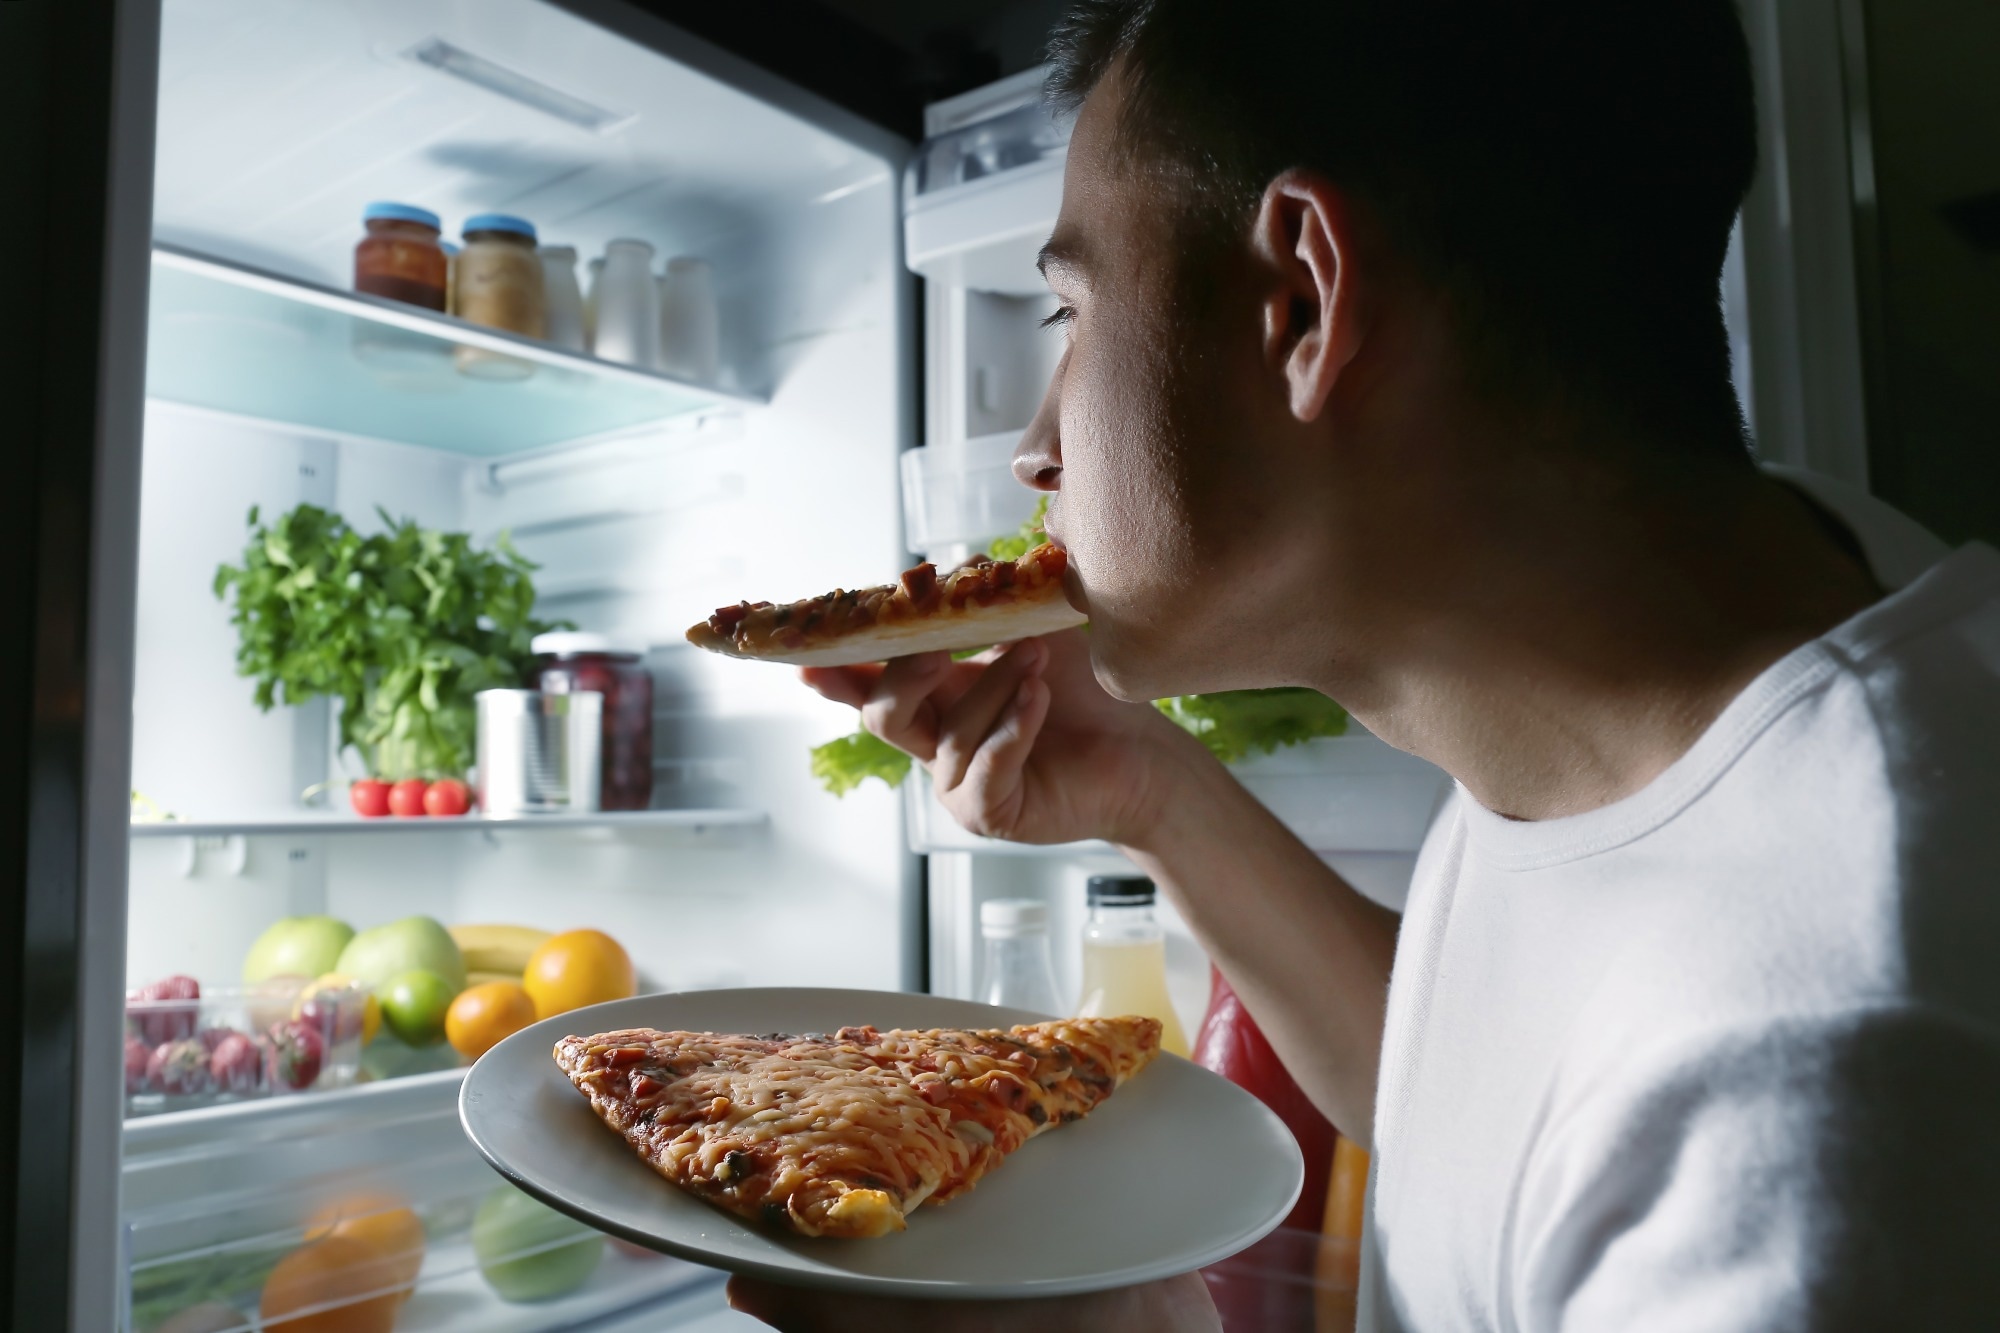 Study: Association between Late-Eating Pattern and Higher Consumption of Ultra-Processed Food among Italian Adults: Findings from the INHES Study. Image Credit: Pixel-Shot / Shutterstock